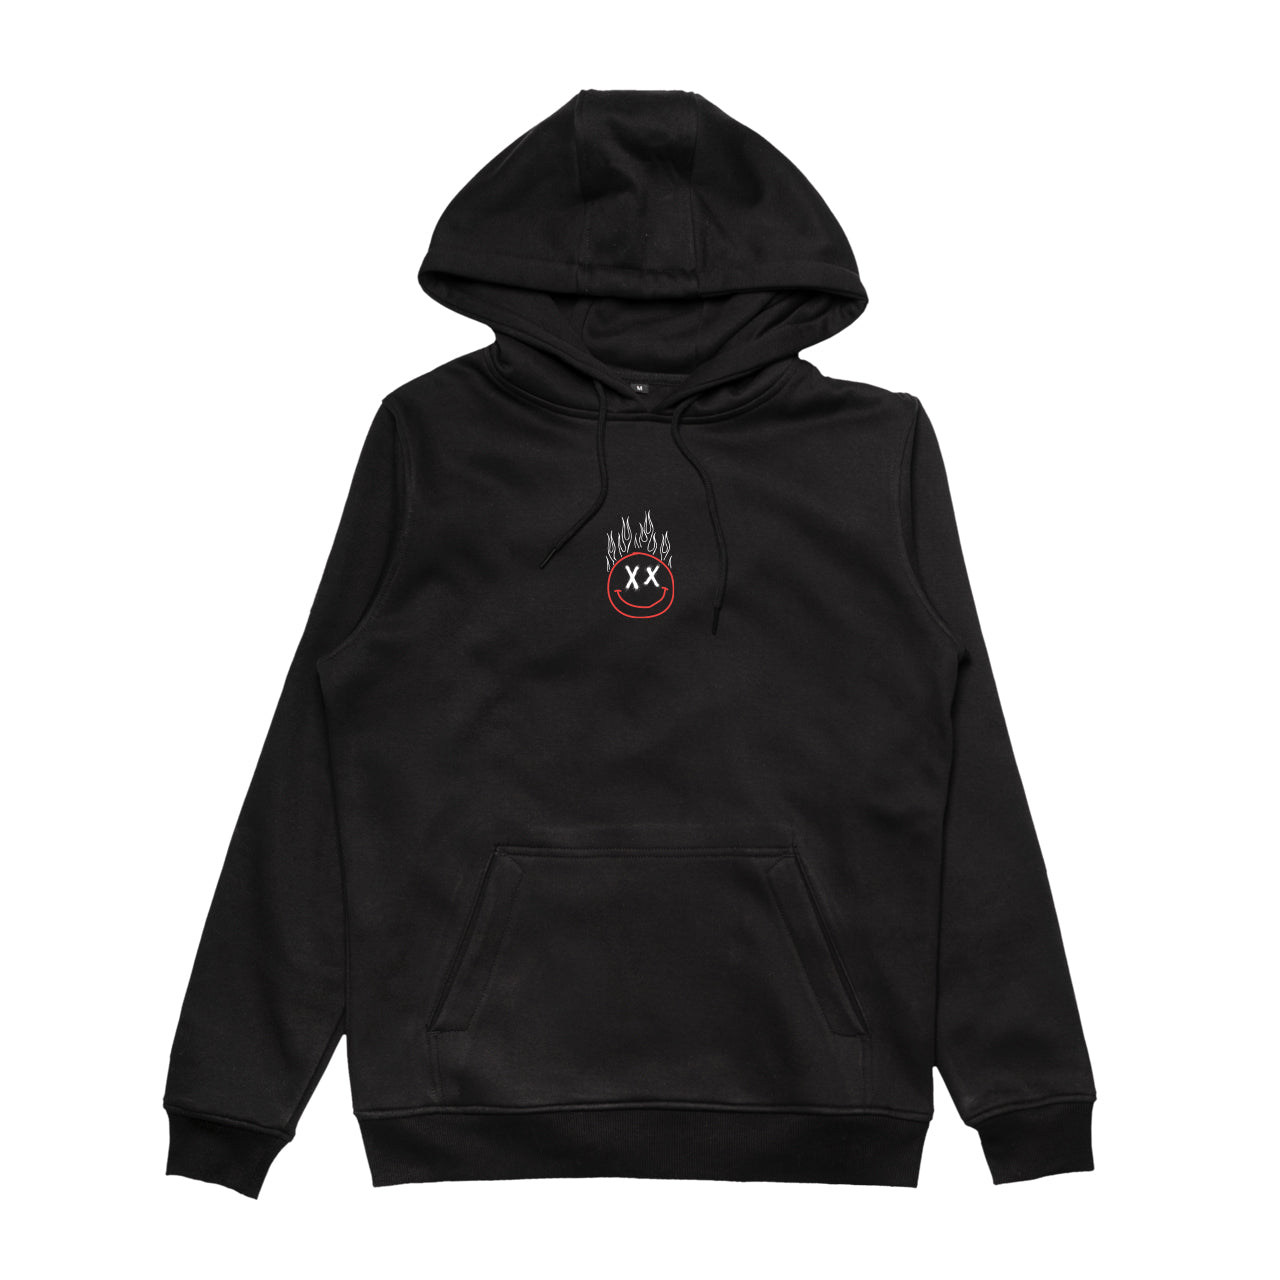 Blacklist - Came To Party Hoodie